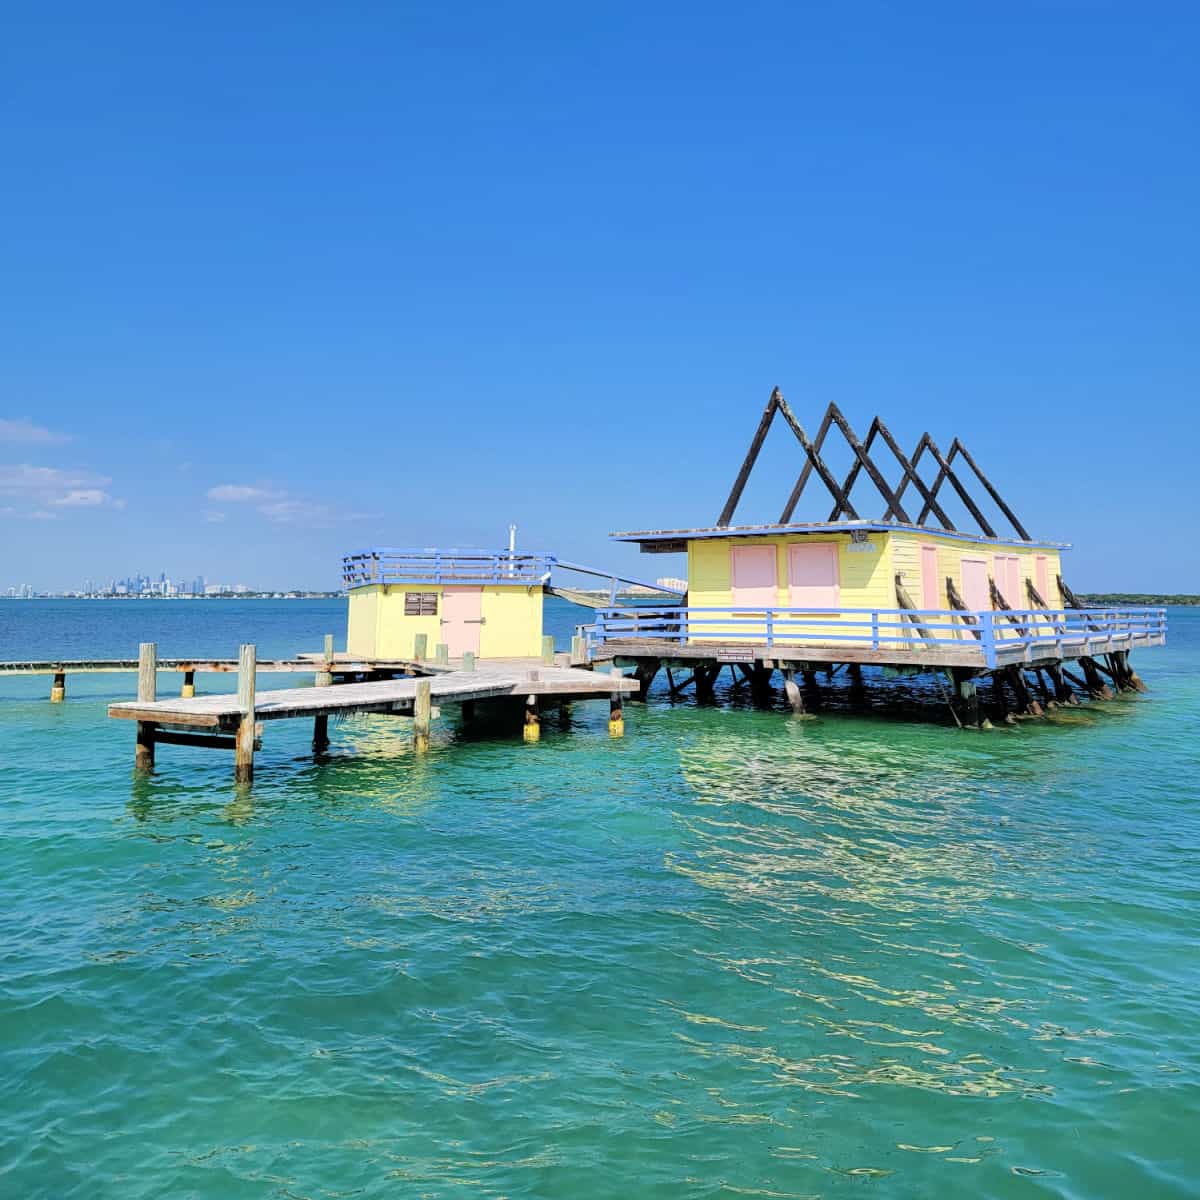 Stilltsville pink and yellow house with dock with the city of Miami in the background on Biscayne Bay